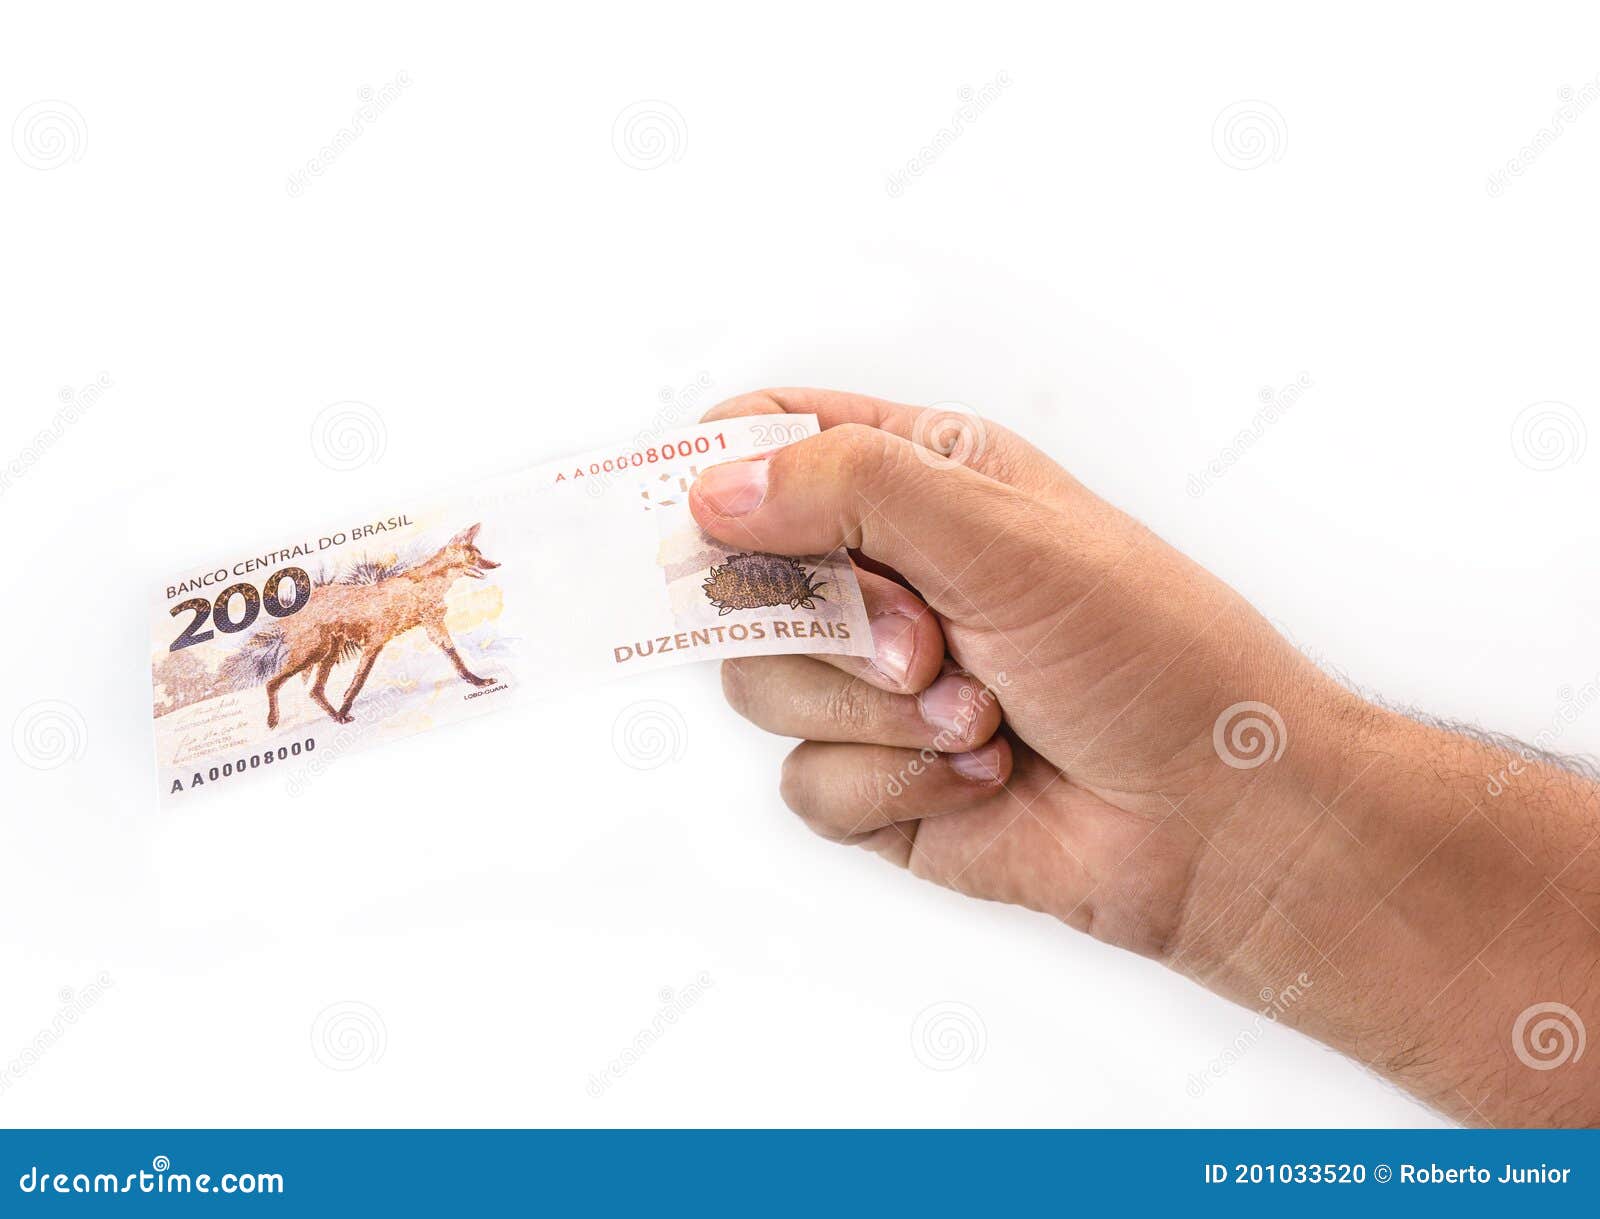 hand holding 200 reais bills, brazilian money, fgts concept, emergency aid portion, or economy of brazil